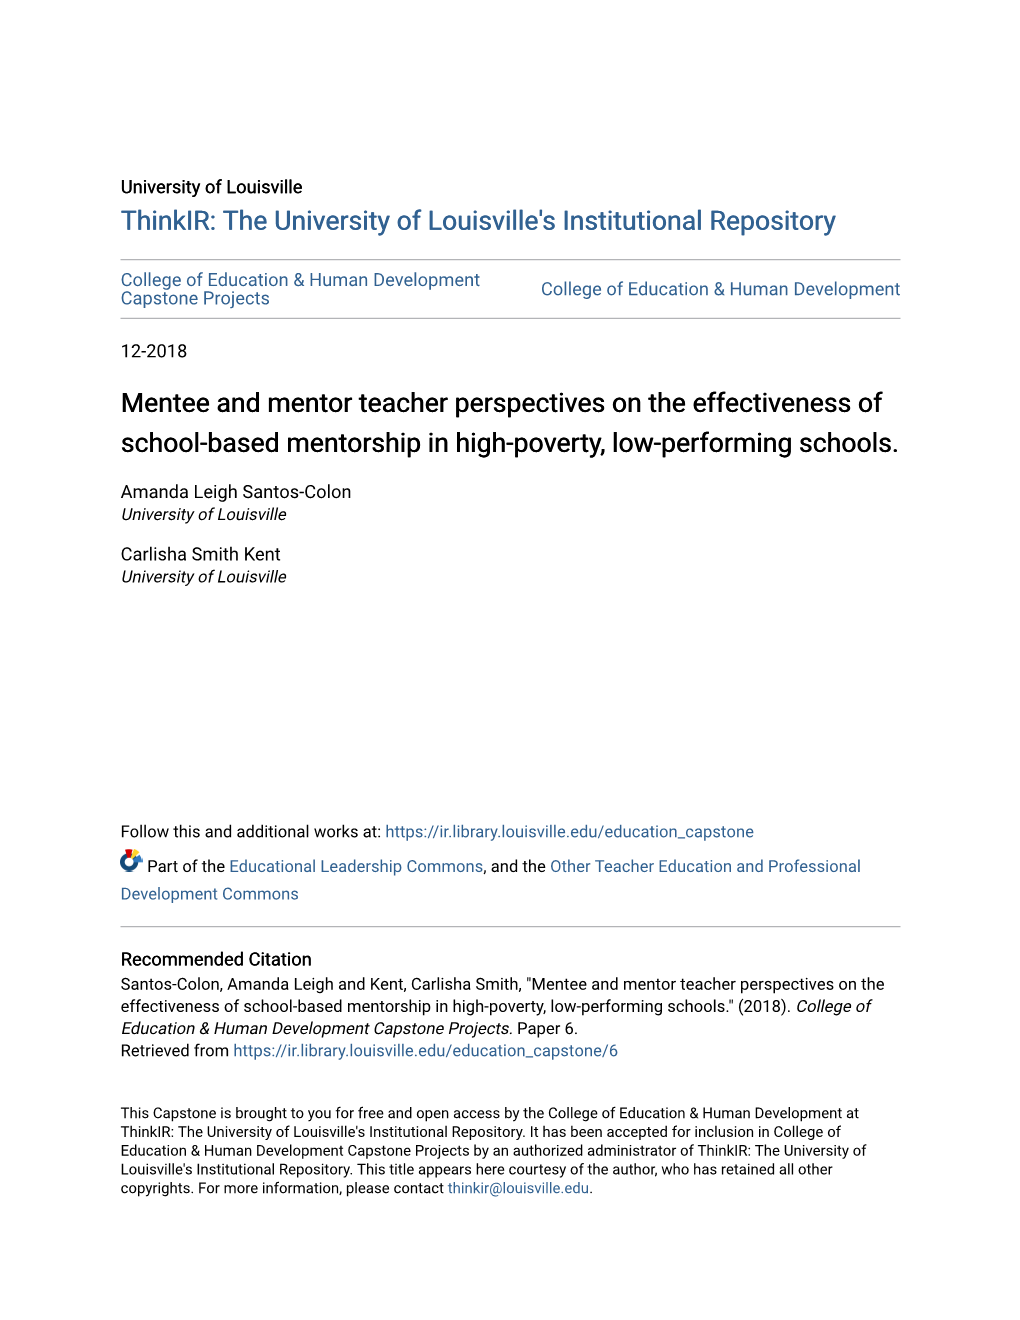 Mentee and Mentor Teacher Perspectives on the Effectiveness of School-Based Mentorship in High-Poverty, Low-Performing Schools